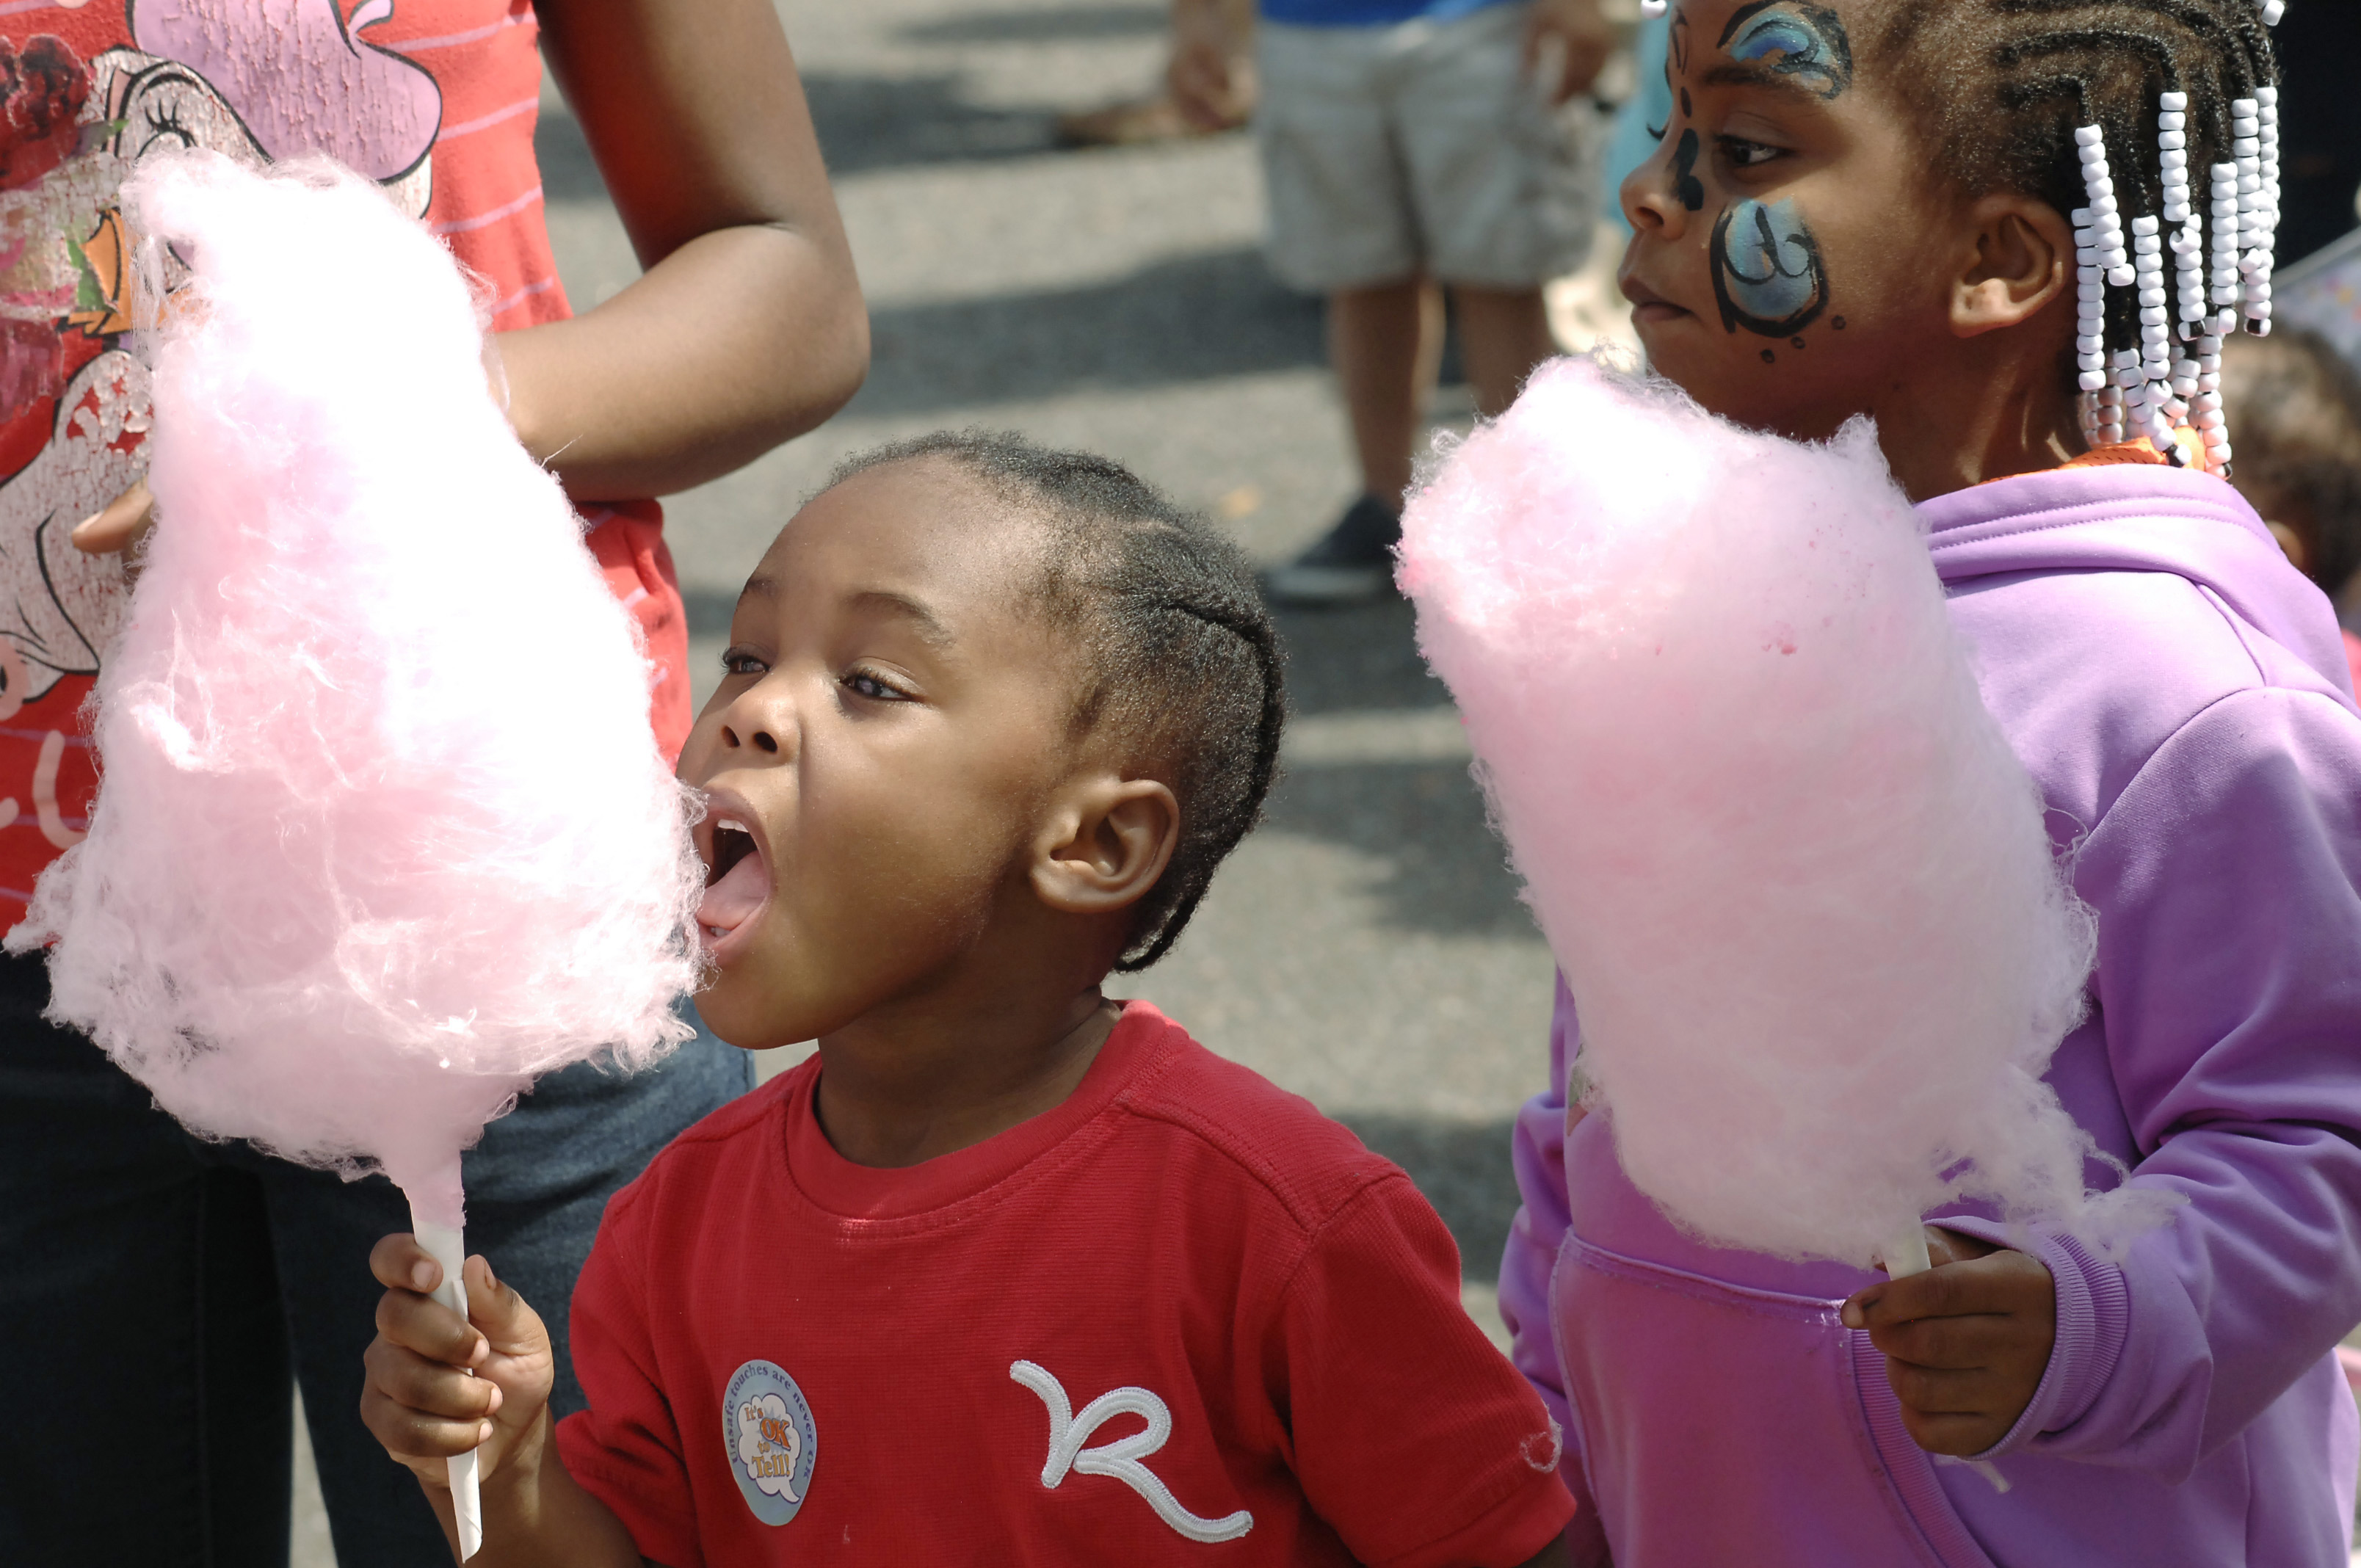 Funmakers brings cotton candy to your birthday party